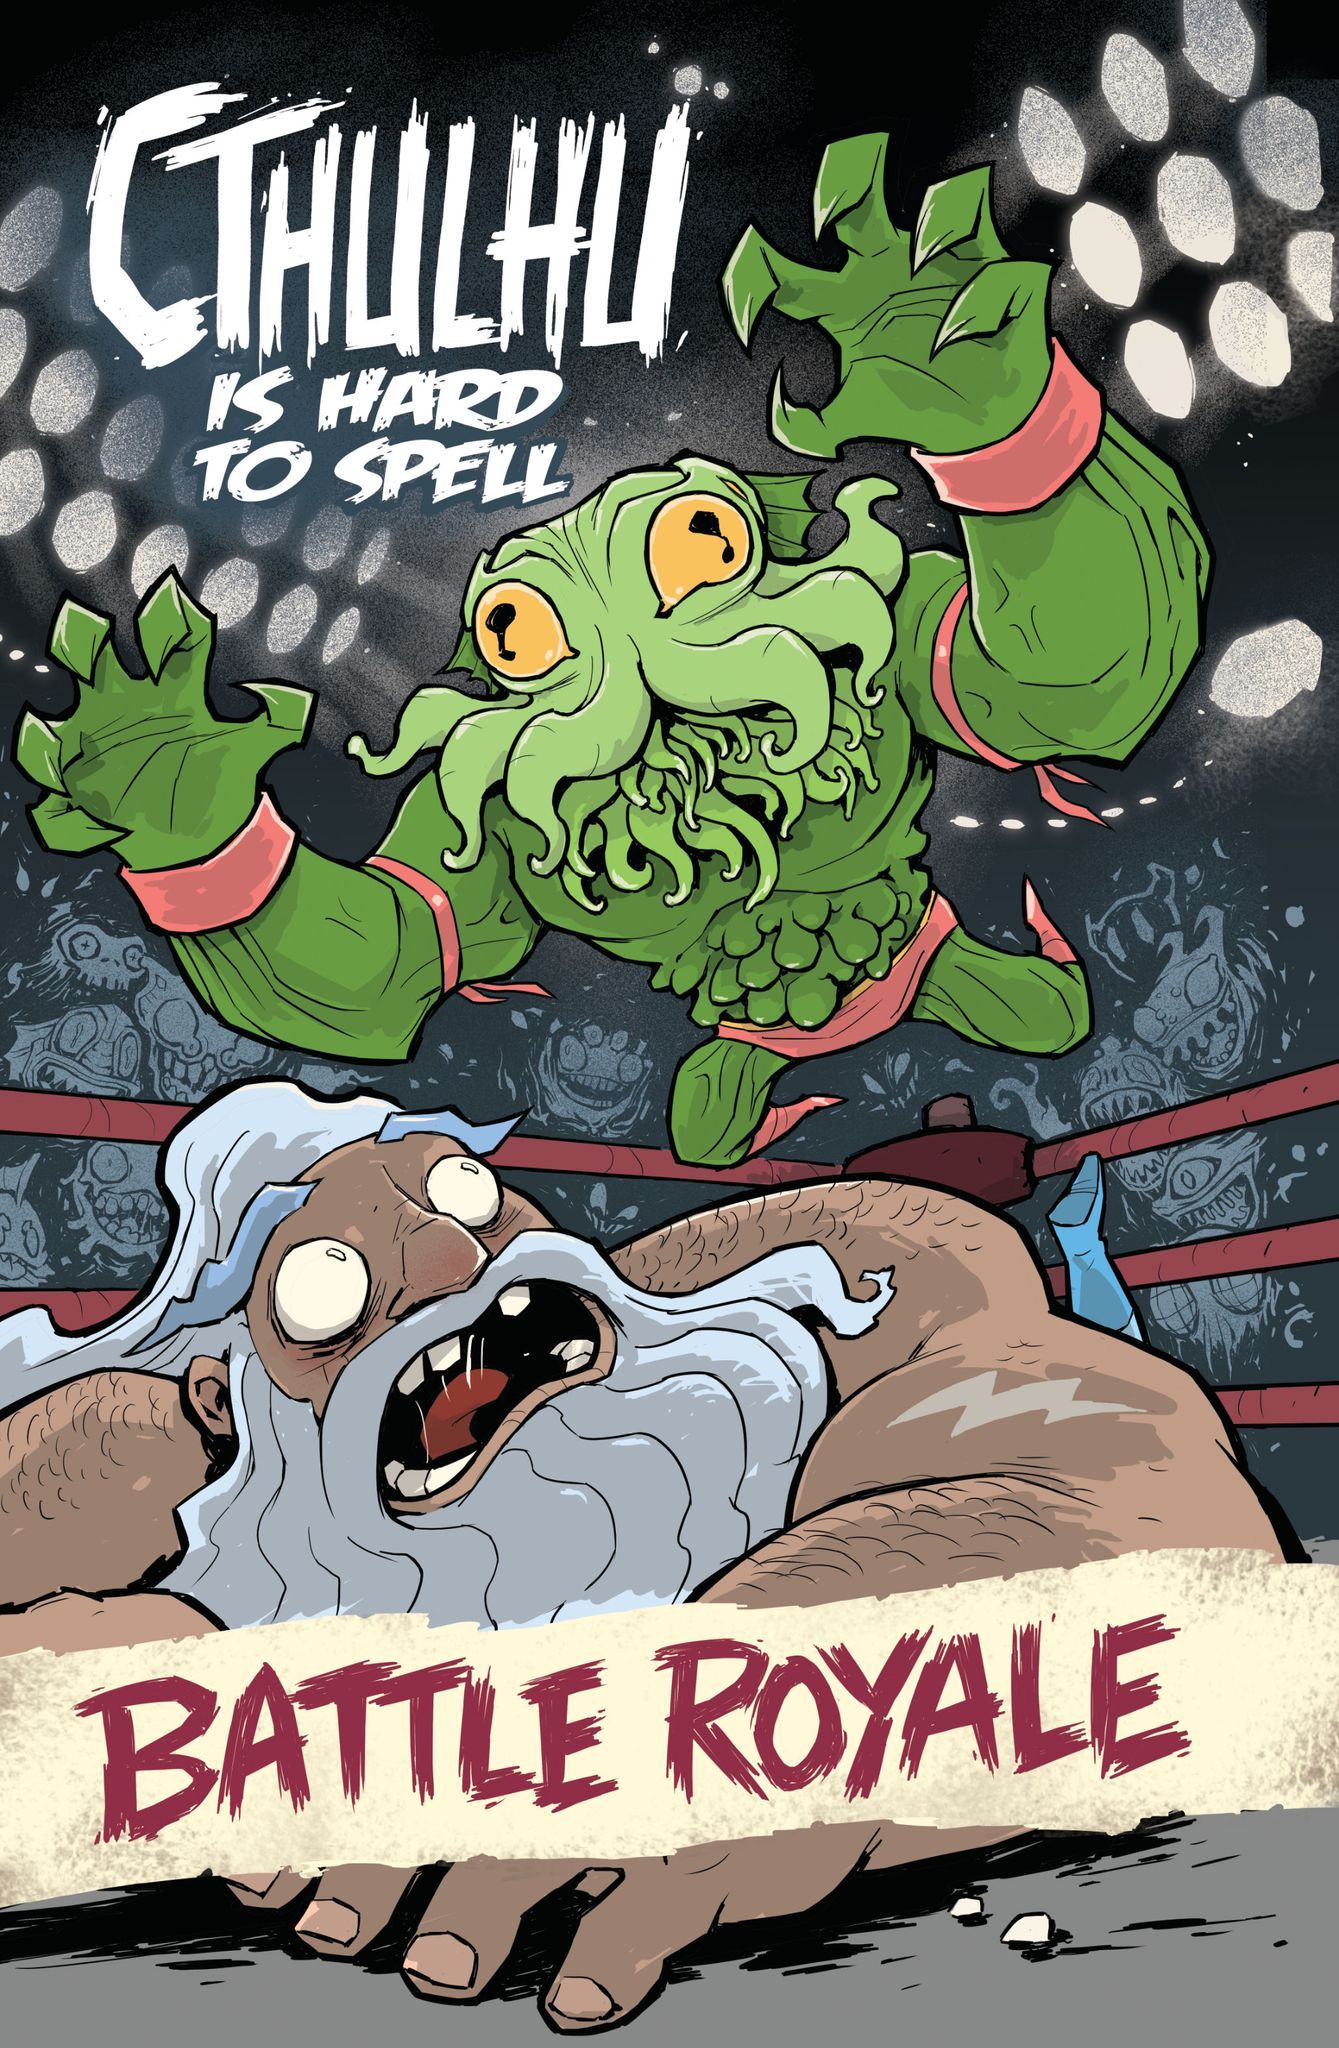 Cthulhu is Hard to Spell: Battle Royale (#3) - USA Today bestselling author  Russell Nohelty